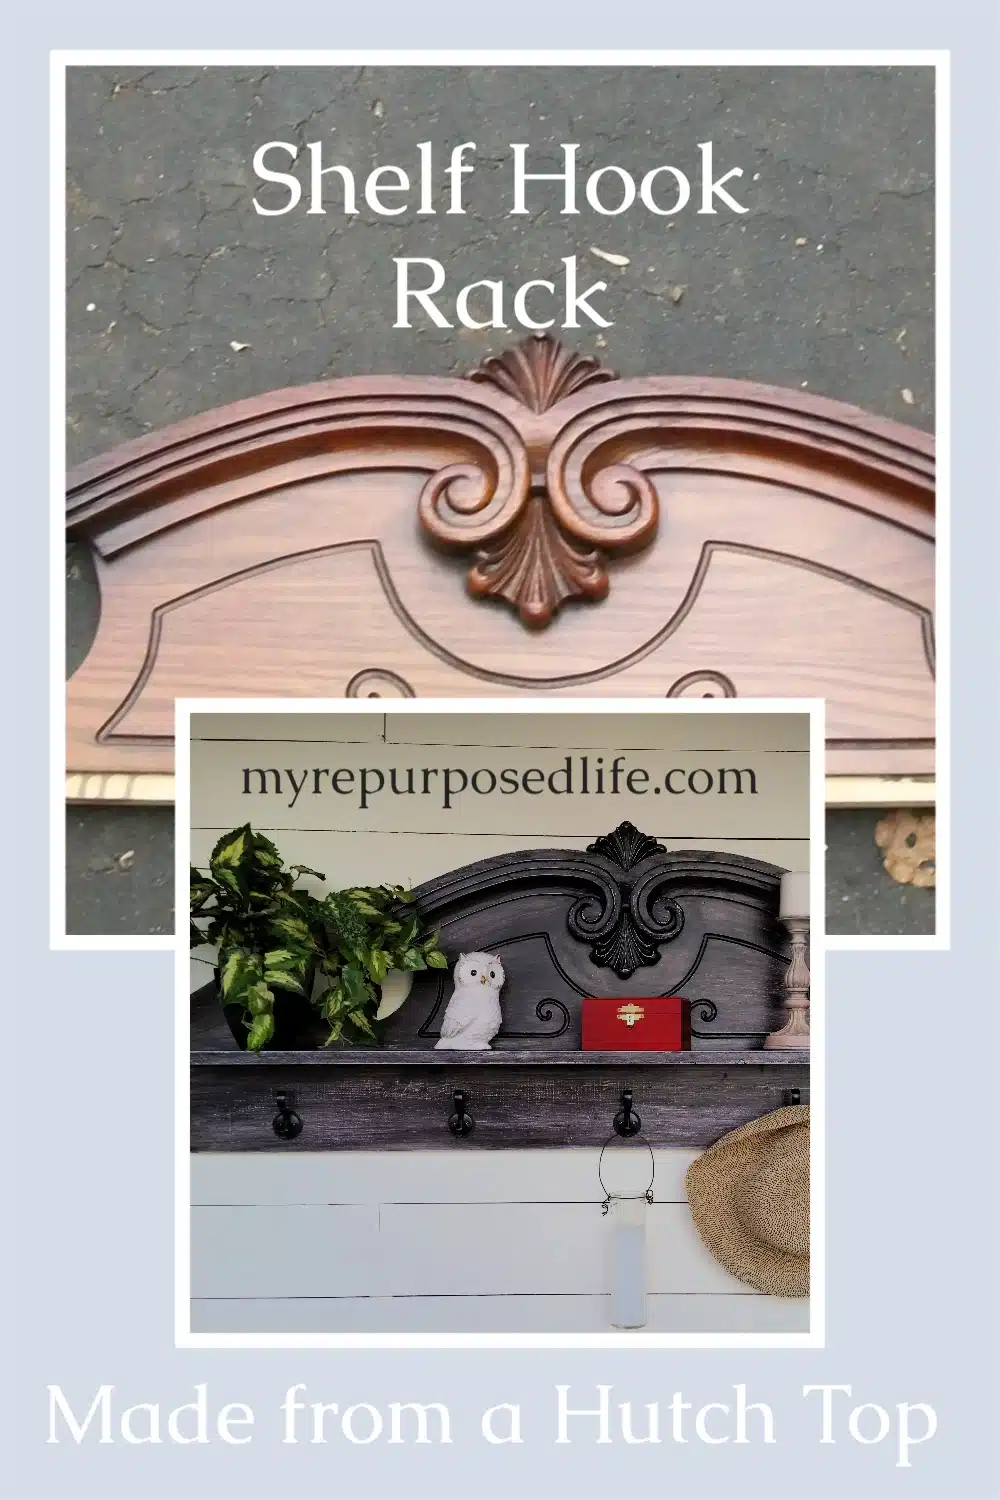 My Repurposed Life did a makeover on this awesome china hutch topper! Now it's a coat rack shelf! #MyRepurposedLife #repurposed #furniture #coatrack #shelf via @repurposedlife